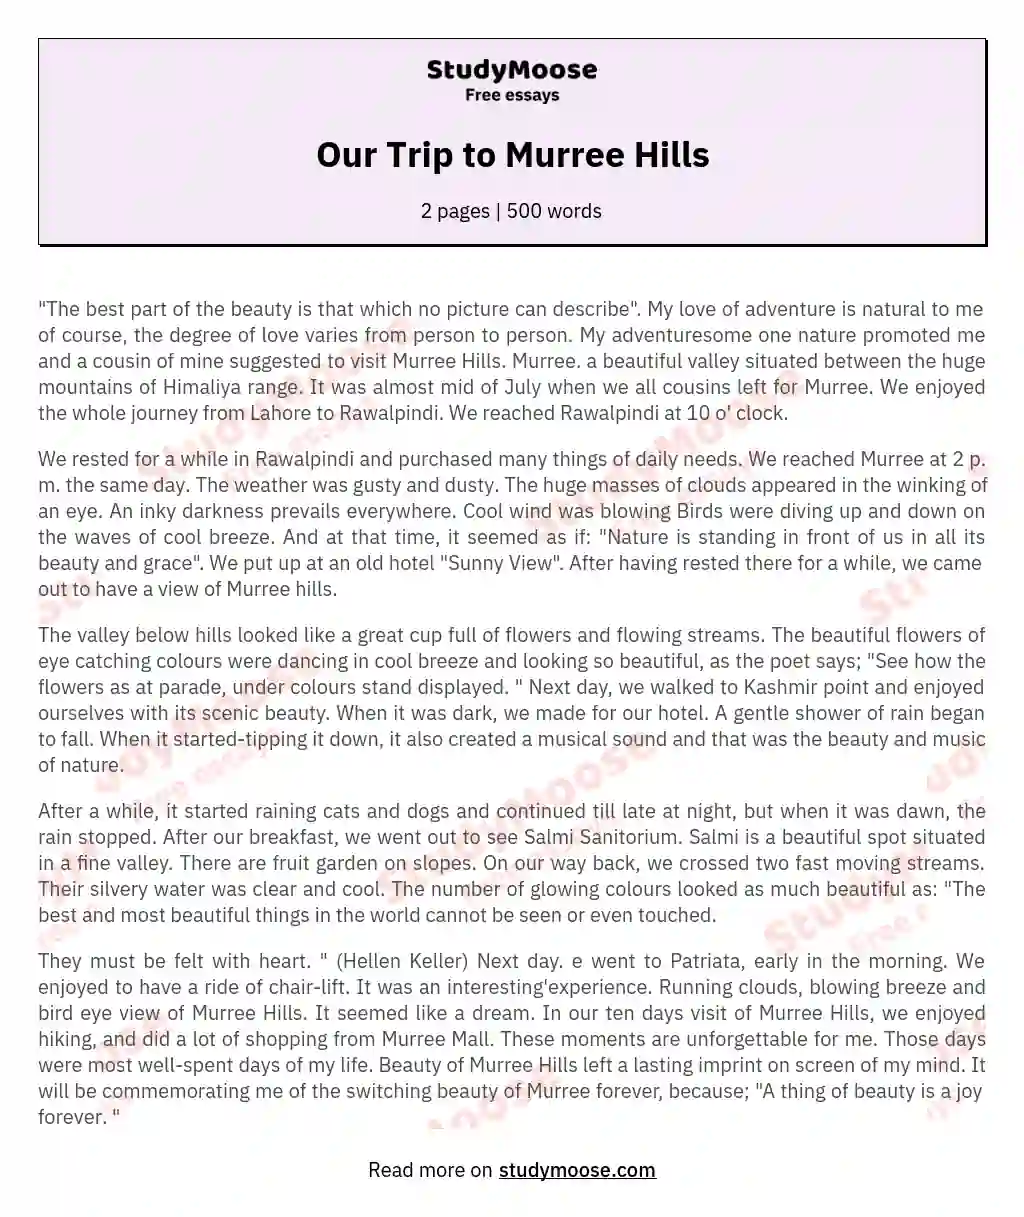 Our Trip to Murree Hills essay